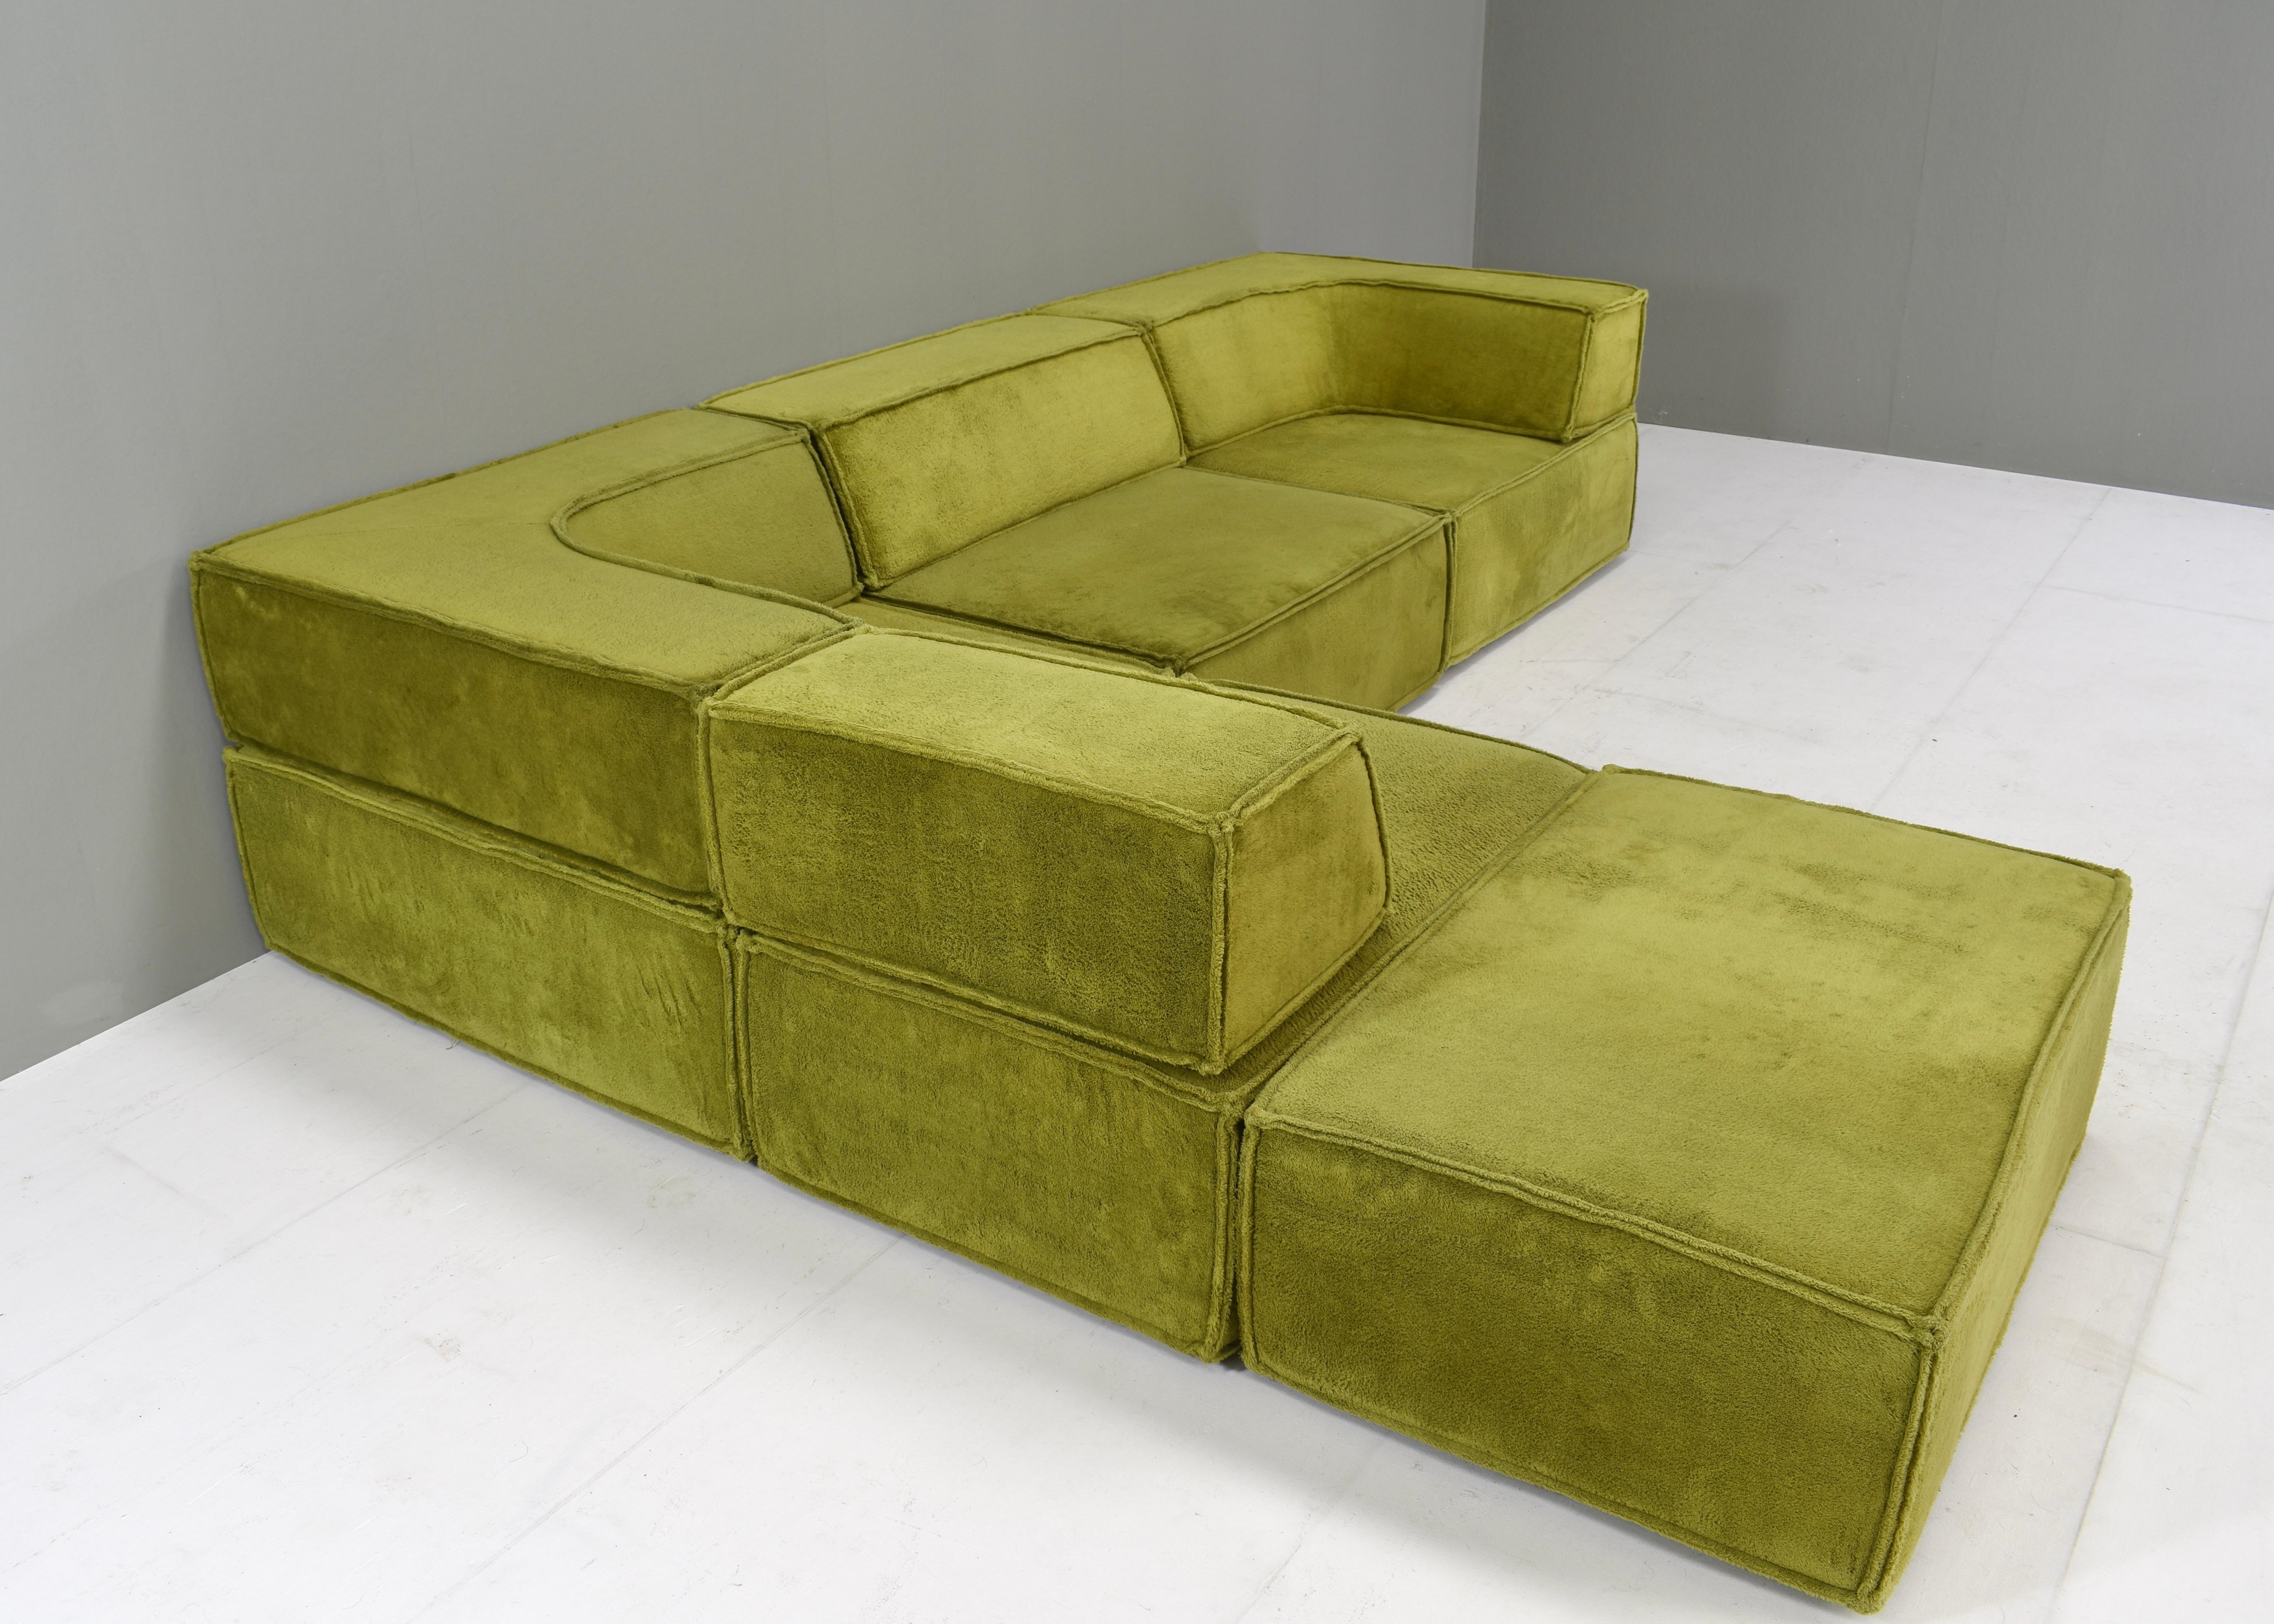 COR Trio Sectional Sofa by Team Form Ag for COR, Germany / Switzerland, 1972 2